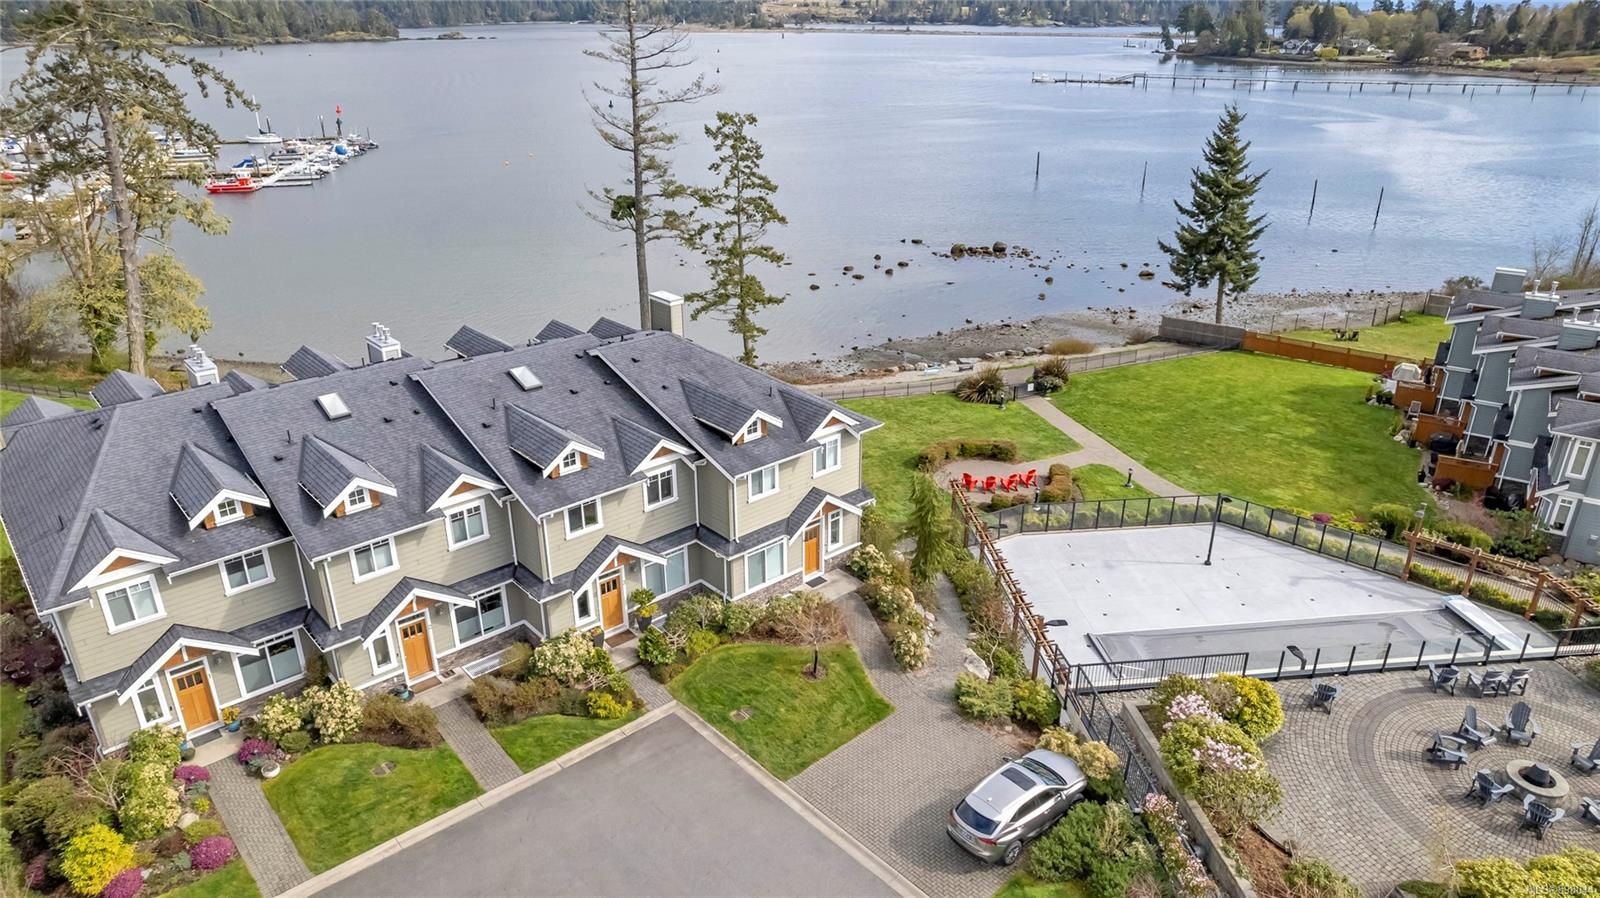 Open House. Open House on Sunday, July 3, 2022 1:00PM - 3:00PM
Oceanfront Sooke Townhouse with 4 bedrooms and 4 bathrooms and all the amenities you can imagine. Open house this Sunday July 3rd from 1-3. $1,199,000.00 and Priced to sell so Come see your ne